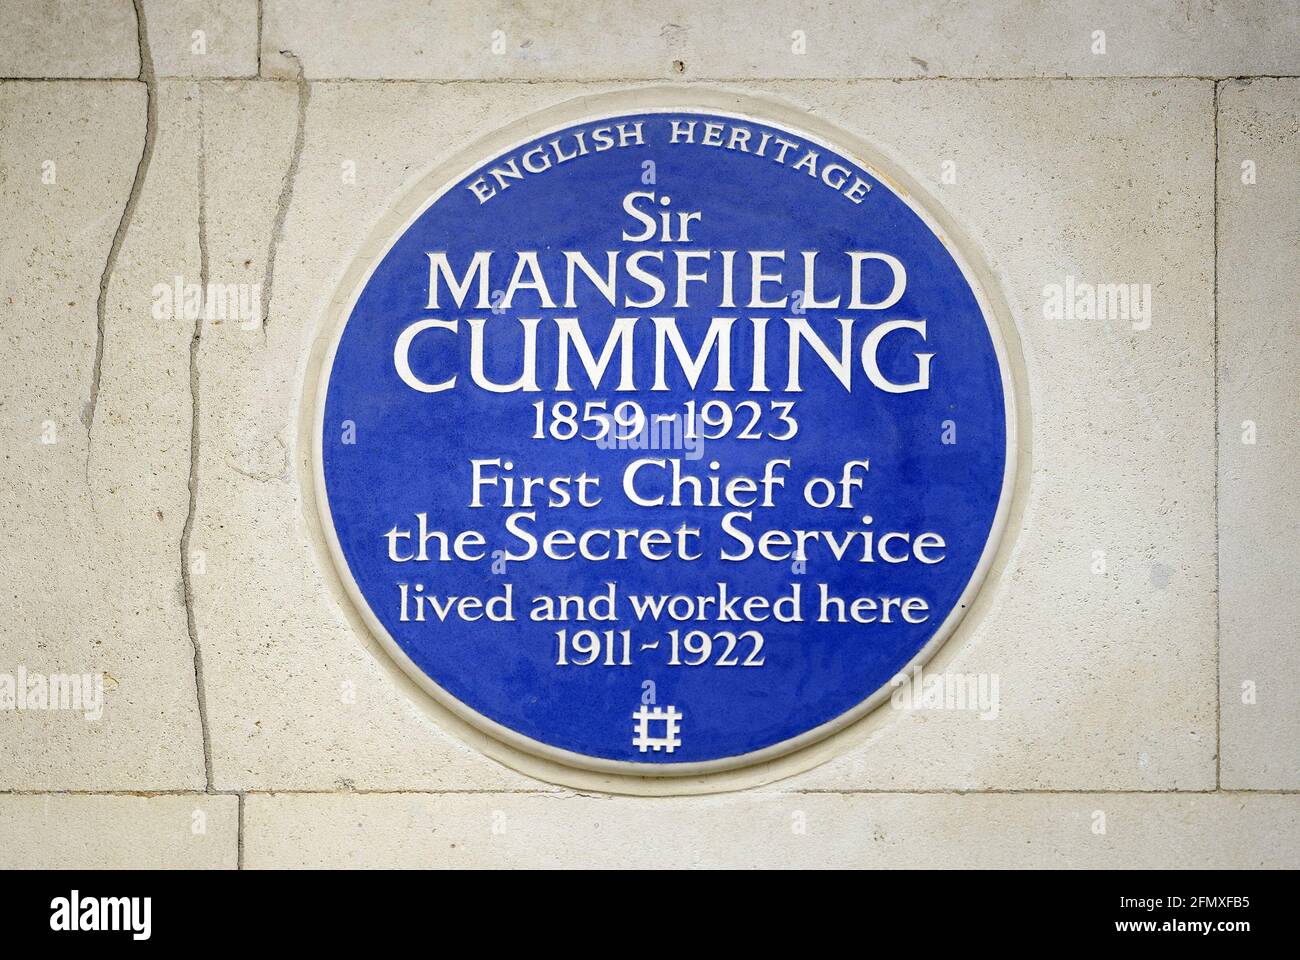 London, UK. Commemorative plaque: 'Sir Mansfield Cumming 1859-1923 First Chief of the Secret Service lived and worked here 1911-1922' at 2 Whitehall C Stock Photo